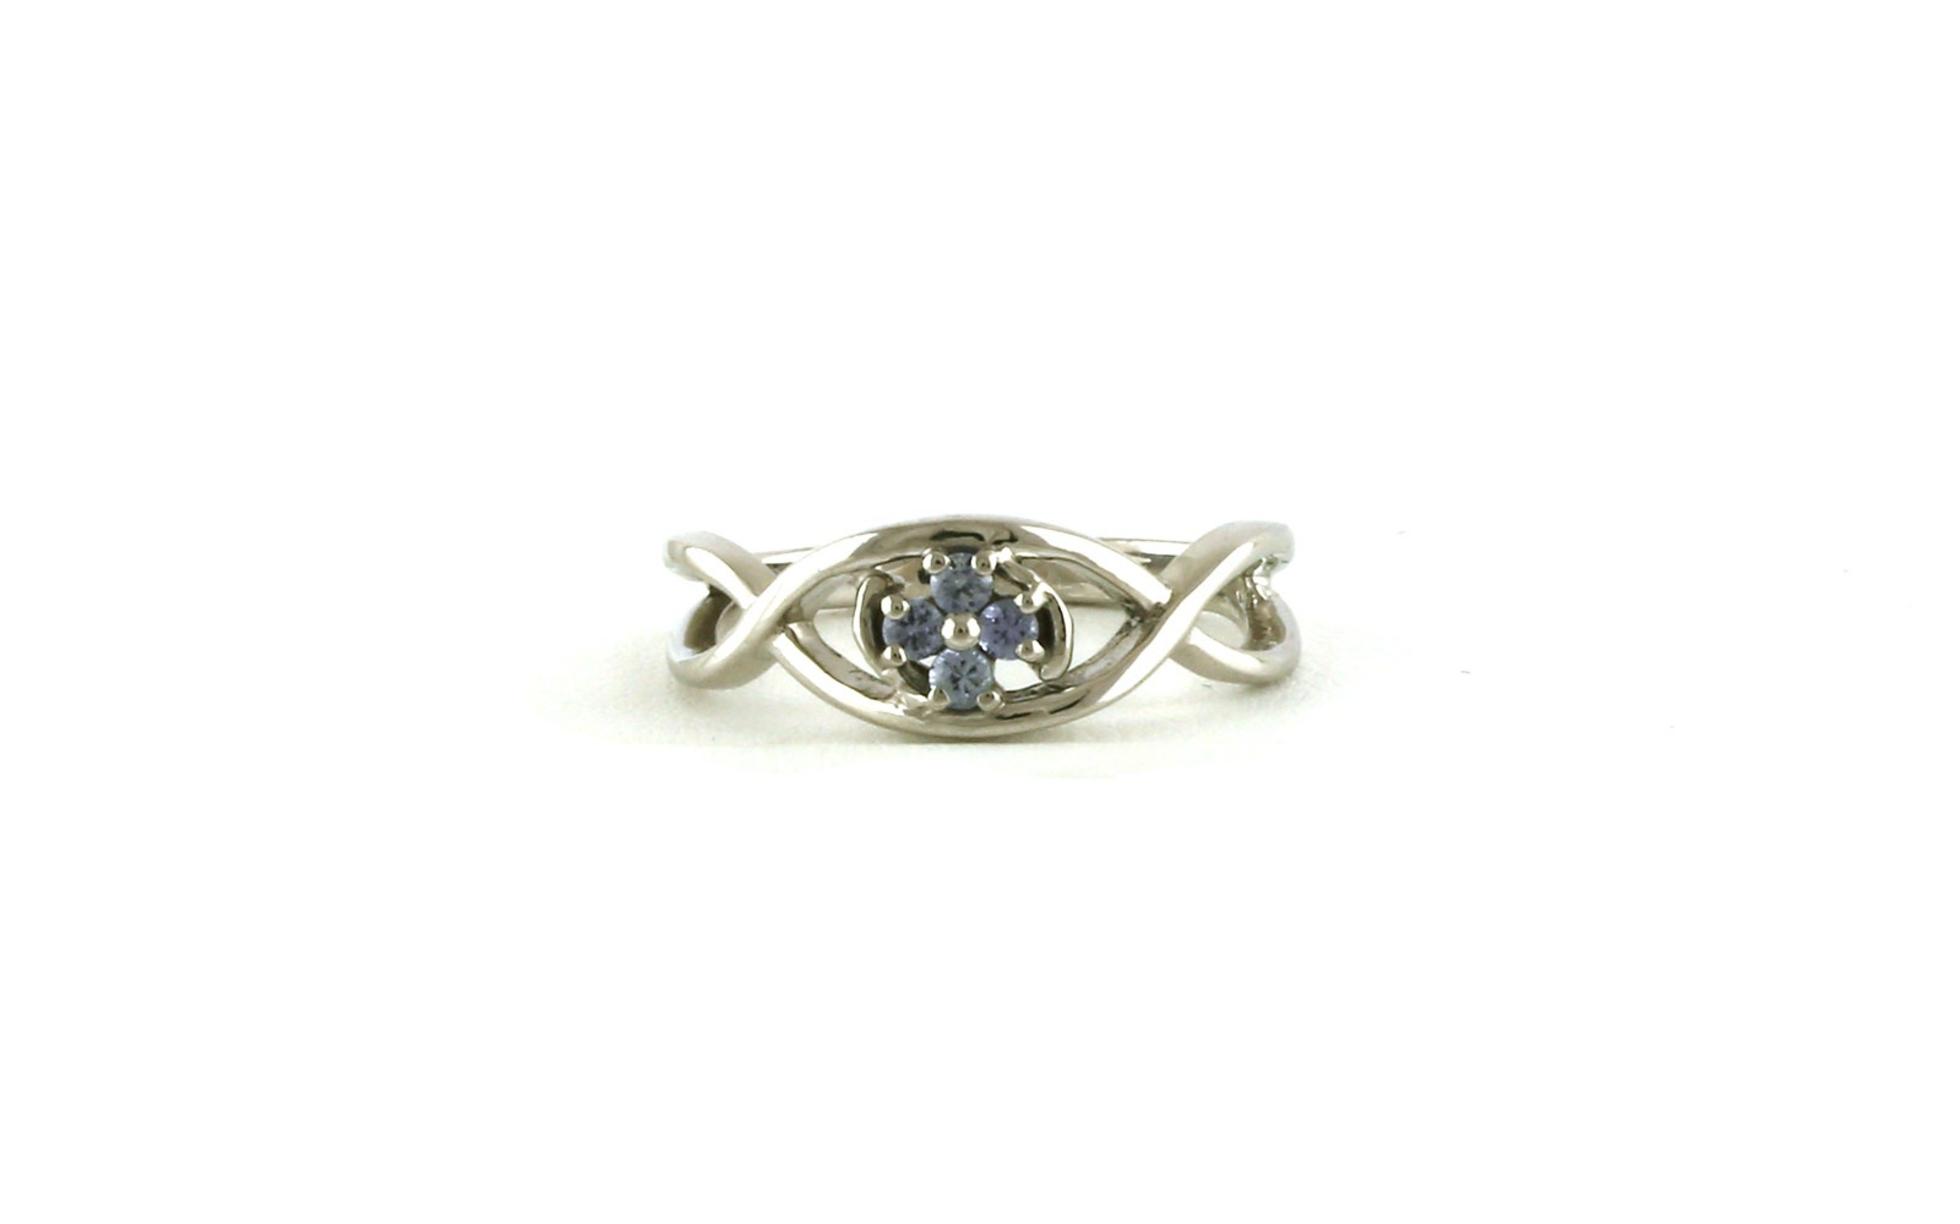 Woven 4-Stone Floral Cluster Montana Yogo Sapphire Ring in Sterling Silver (0.12cts TWT)